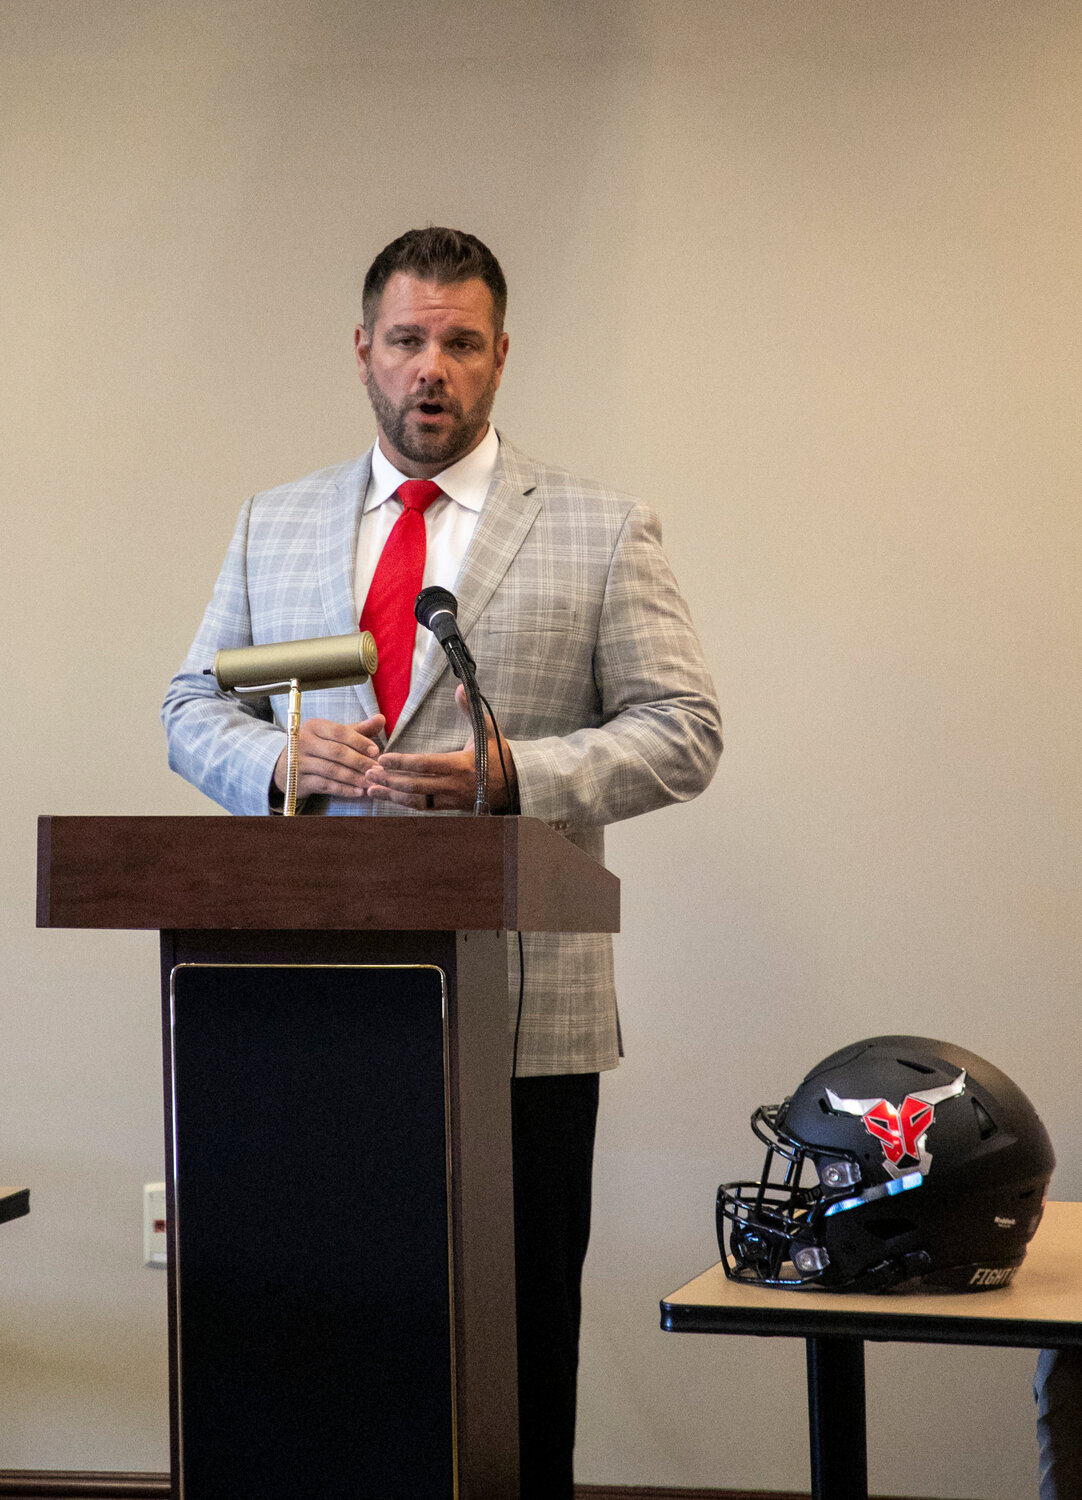 Spanish Fort head football coach Chase Smith meets with the press at Baldwin County Media Days on July 31 at Bryant Bank in Daphne. Smith enters his second year at the helm of the Toro program he previously served as an assistant.